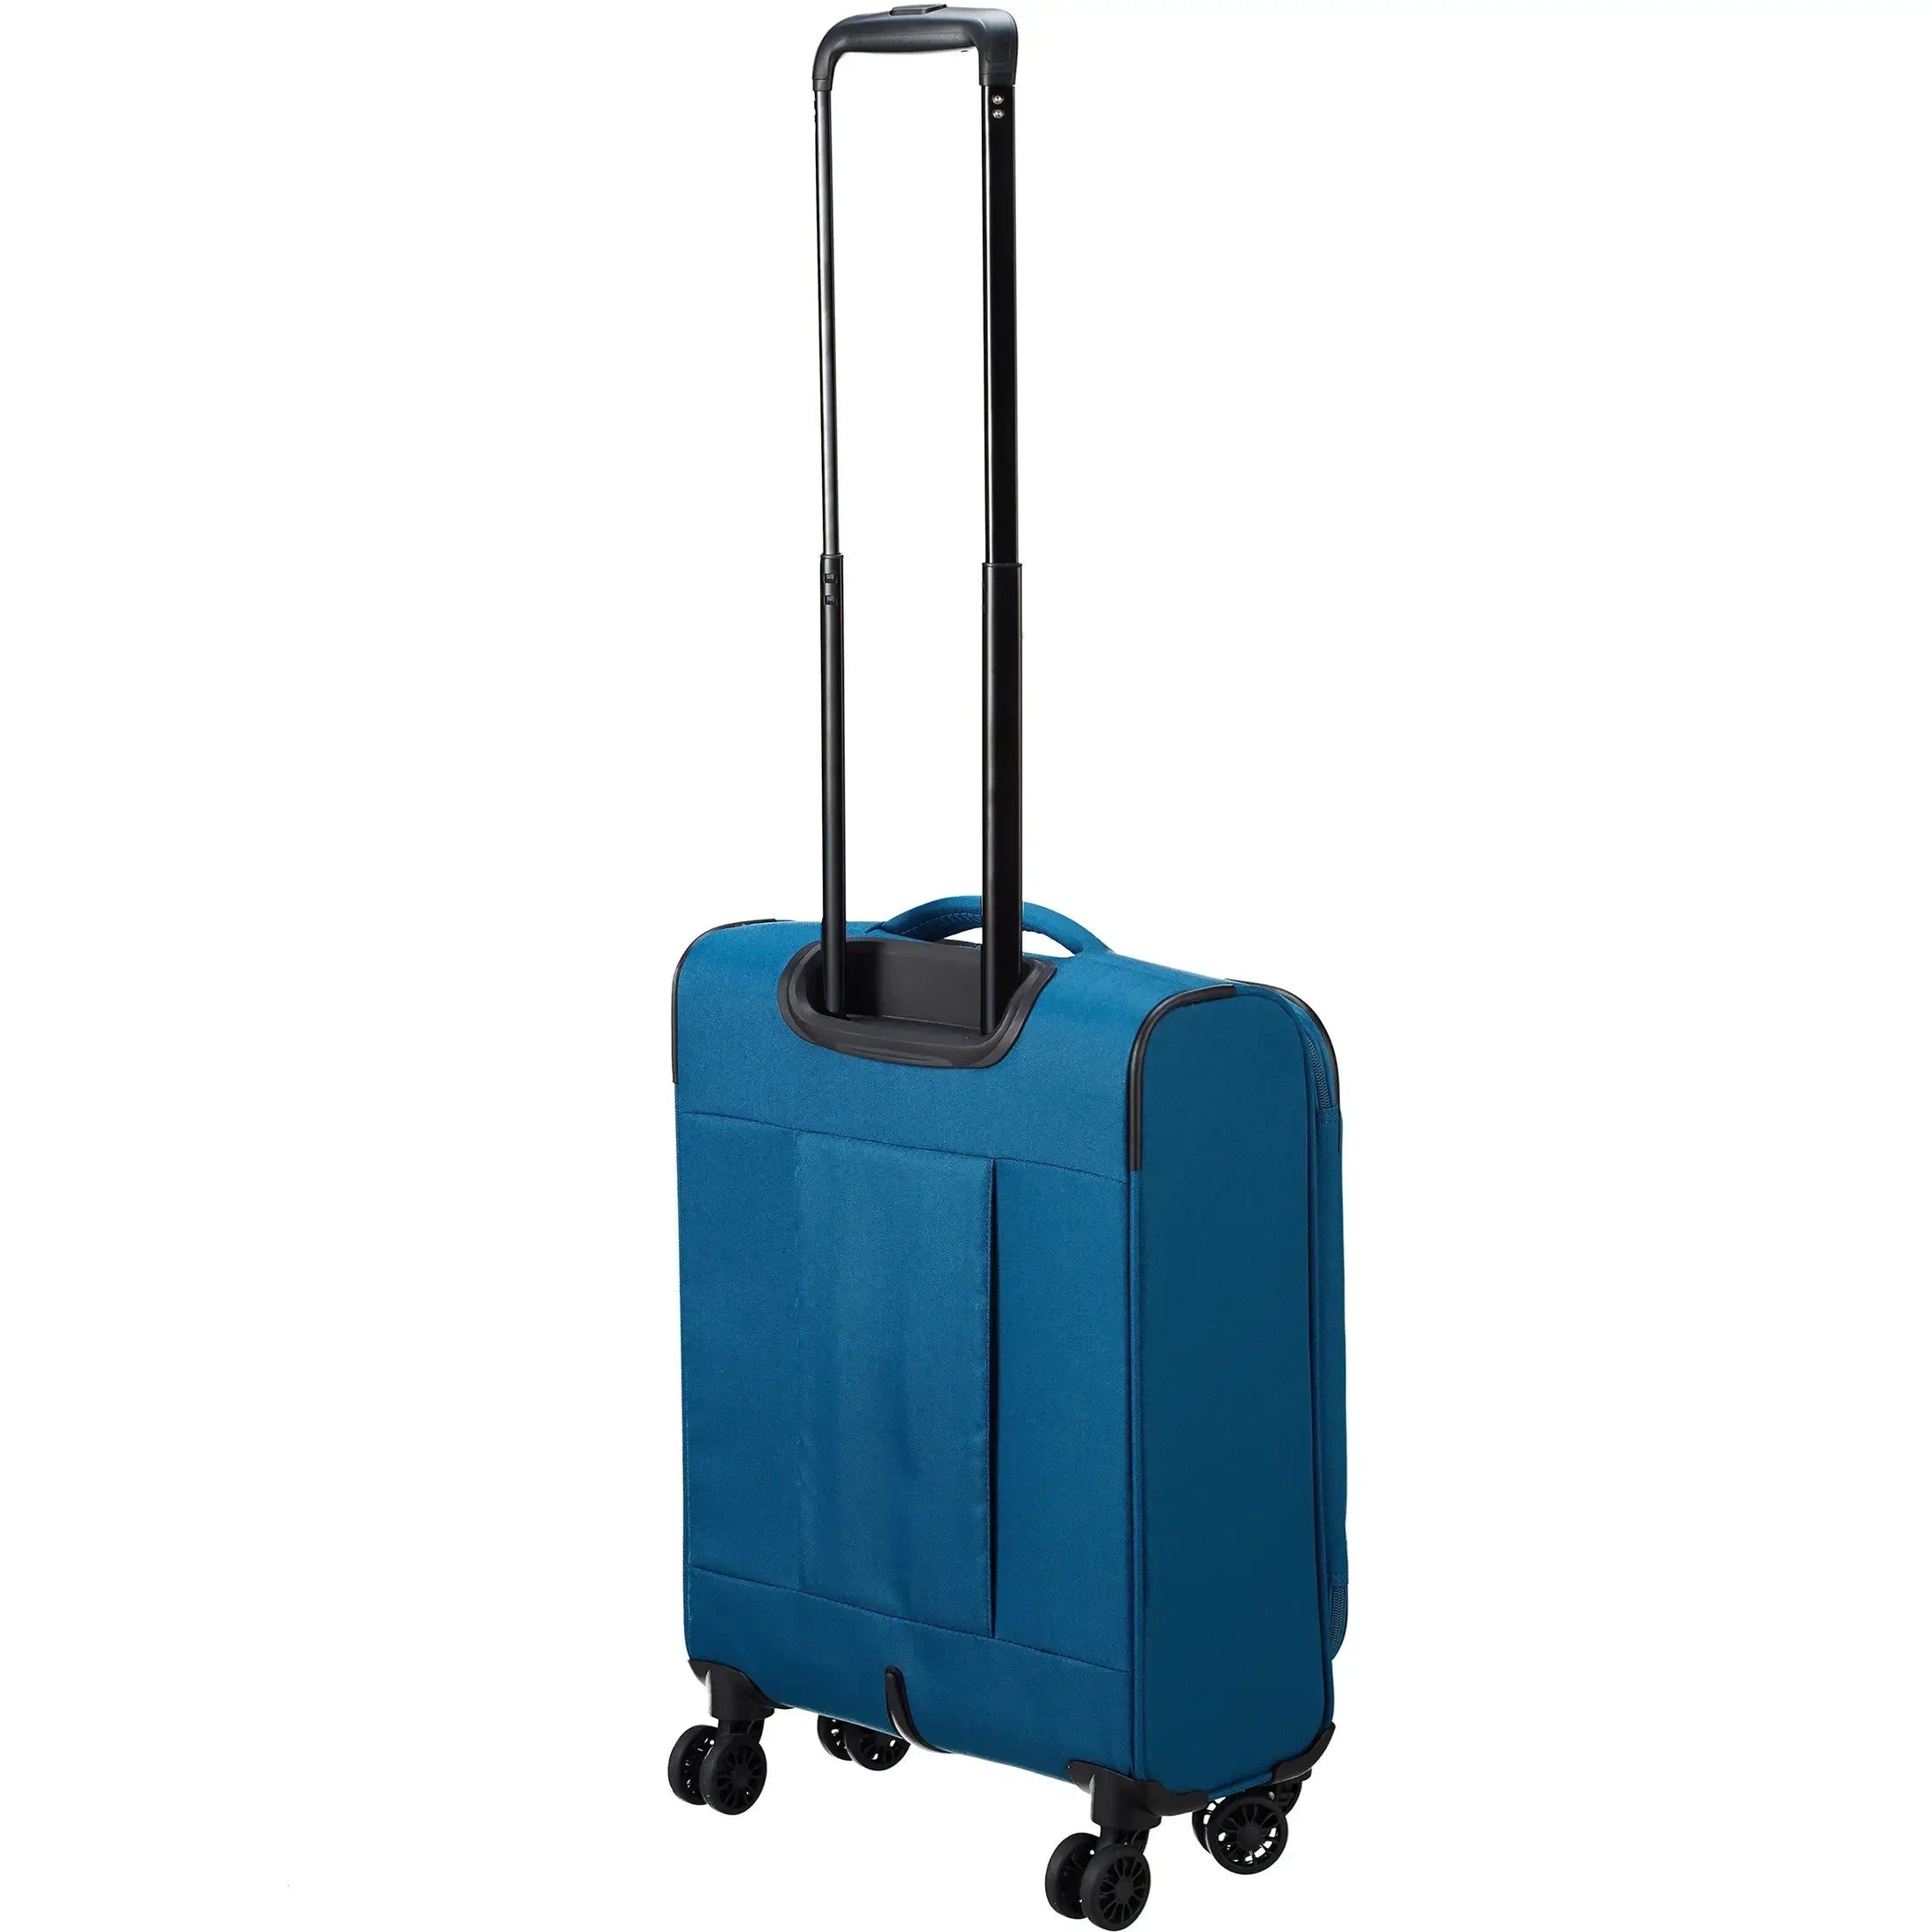 Travelite Chios 4-wheel cabin trolley S 55 cm - red